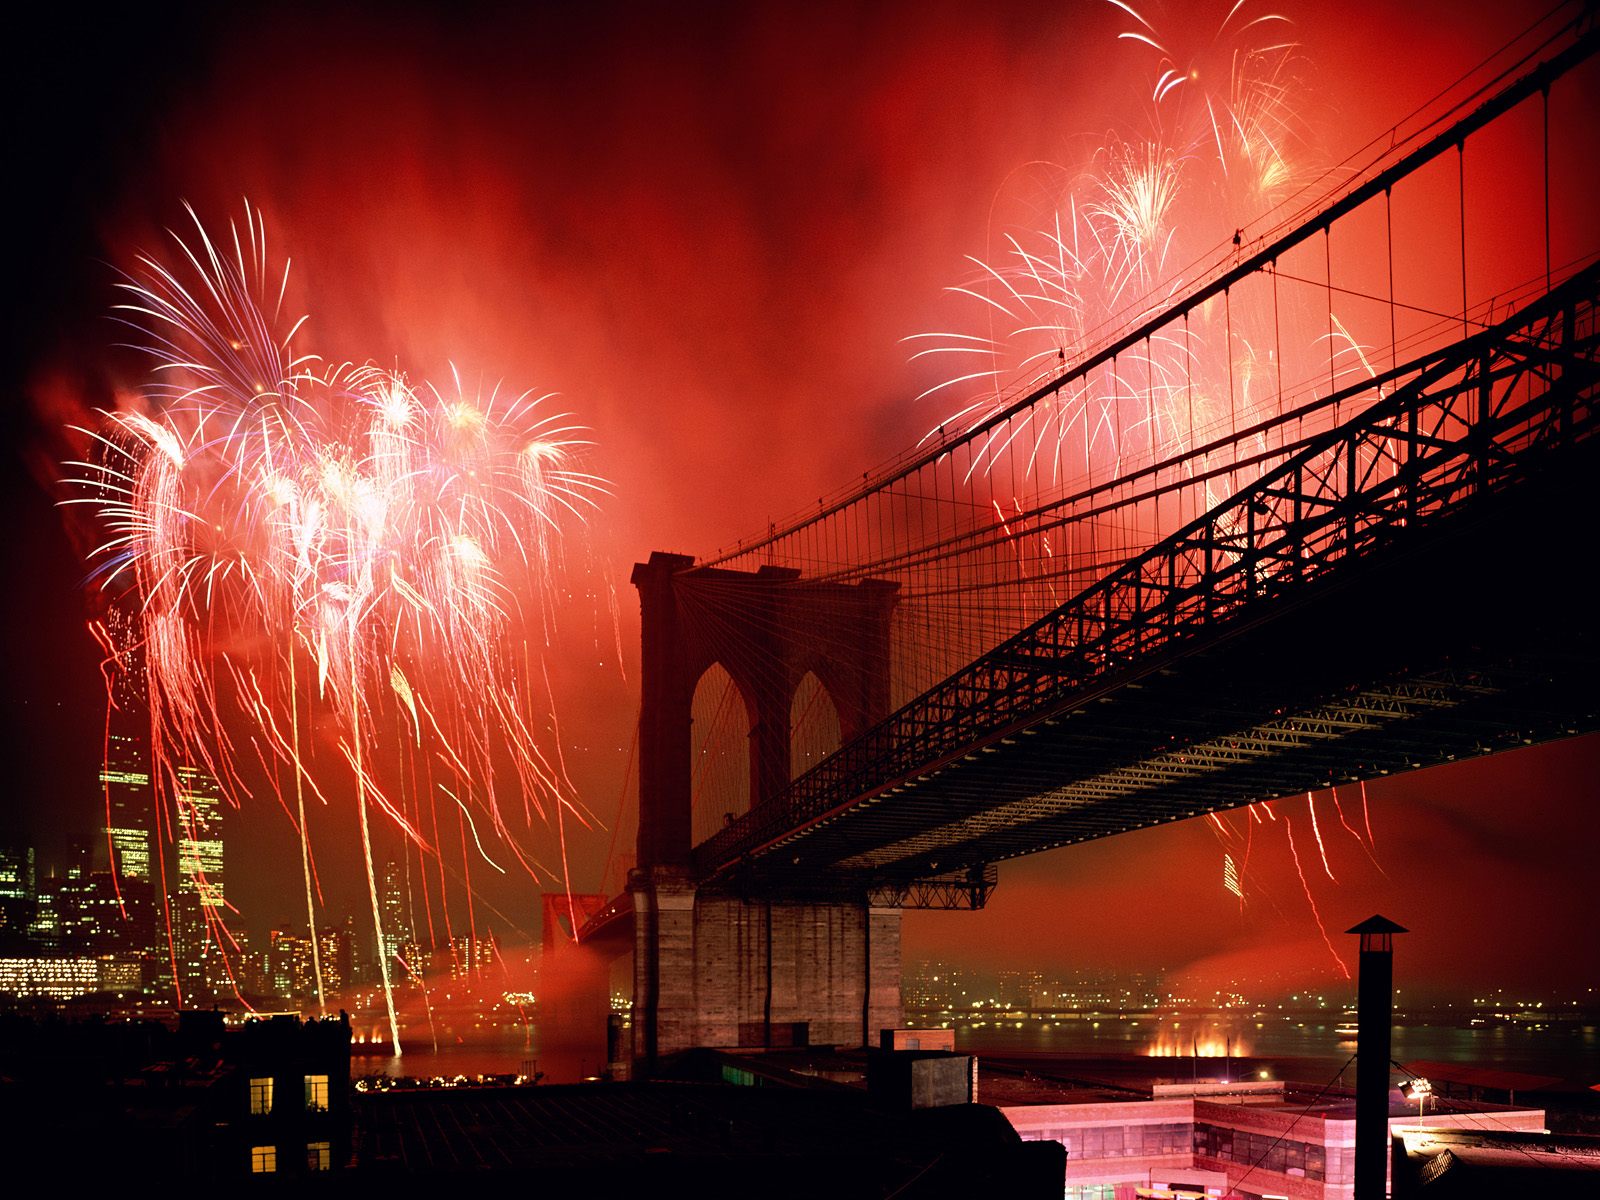  Brooklyn Bridge Celebration Wallpaper and make this wallpaper for your